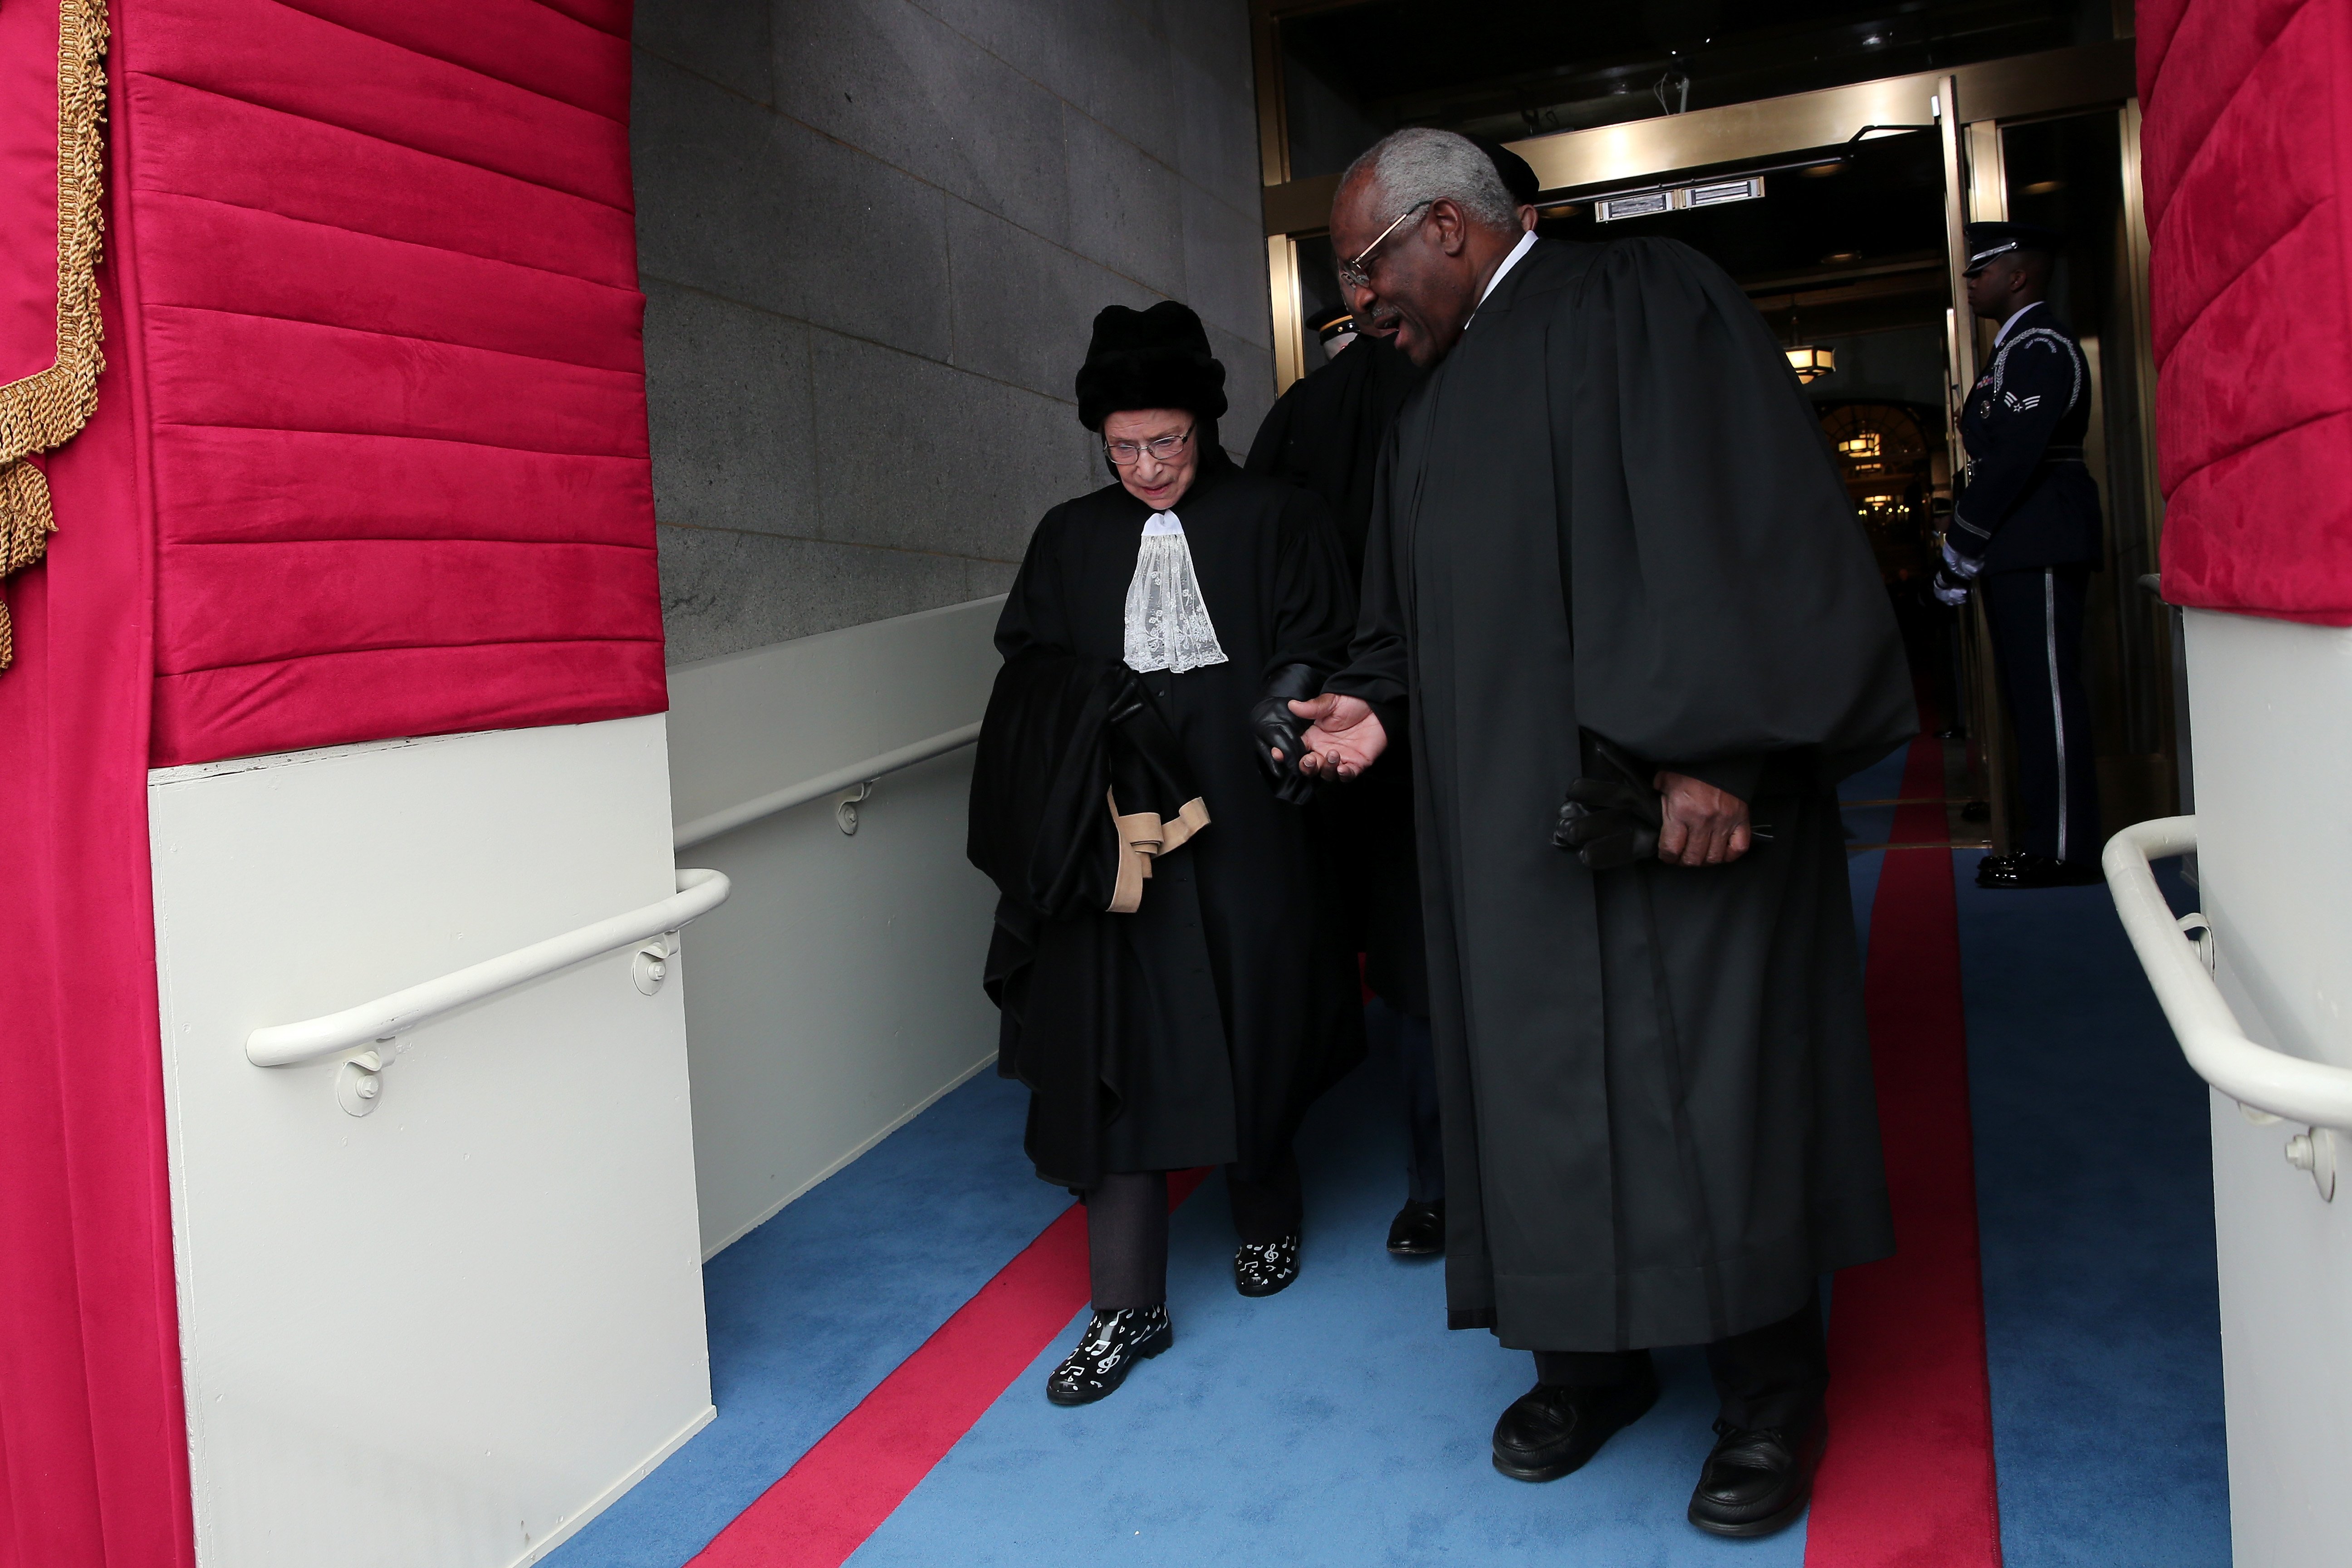 Justice Ruth Bader Ginsburg and Justice Clarence Thomas arriving at the presidential inauguration in Washington, DC | Source: Getty Images